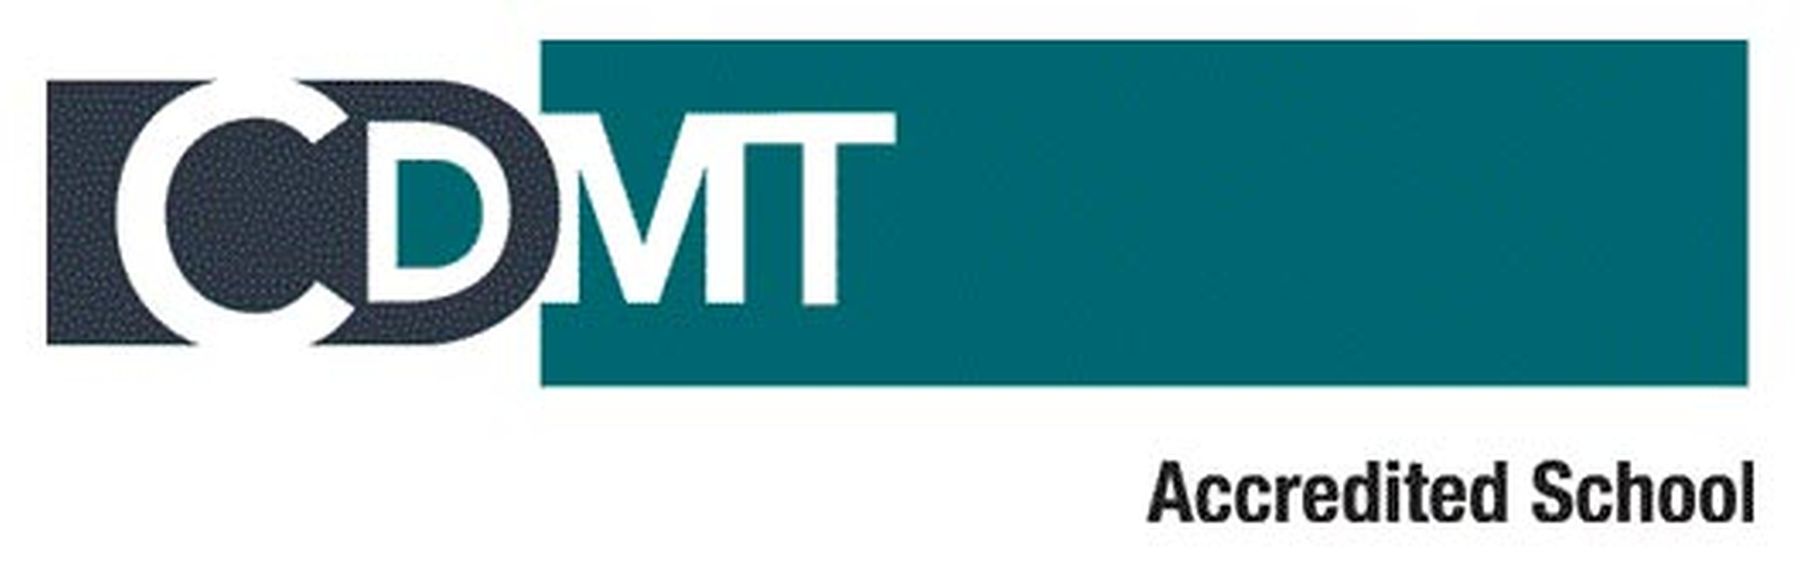 Accredited by CDMT